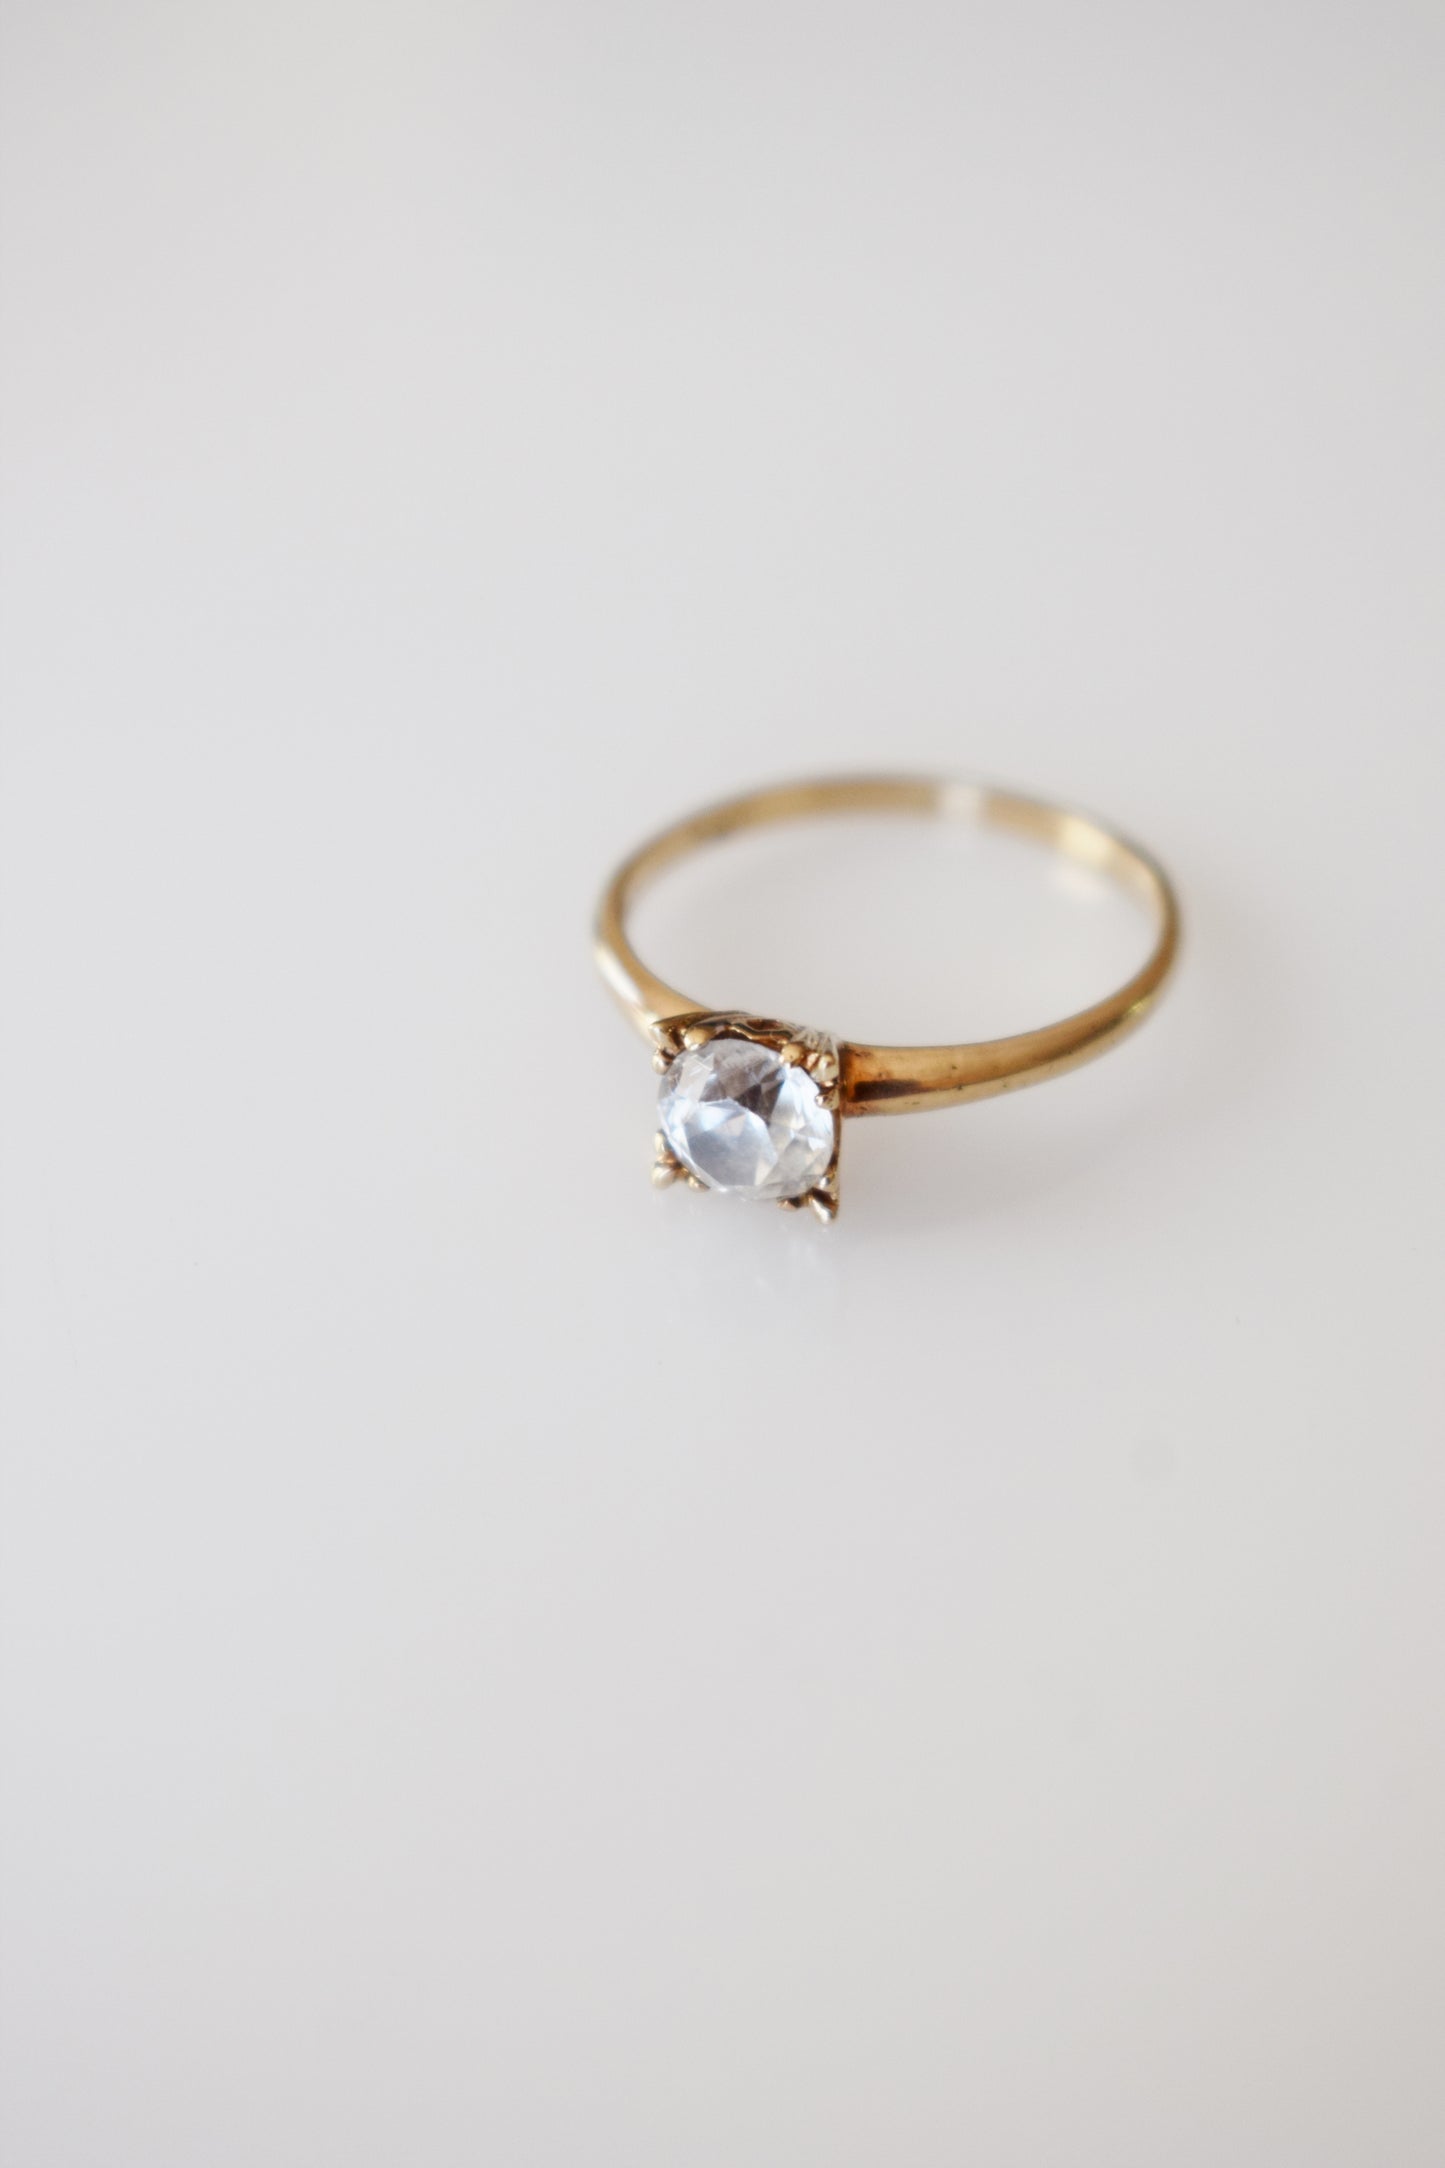 Vintage Art Deco 10kt Gold and Crystal Solitaire Ring | US 6